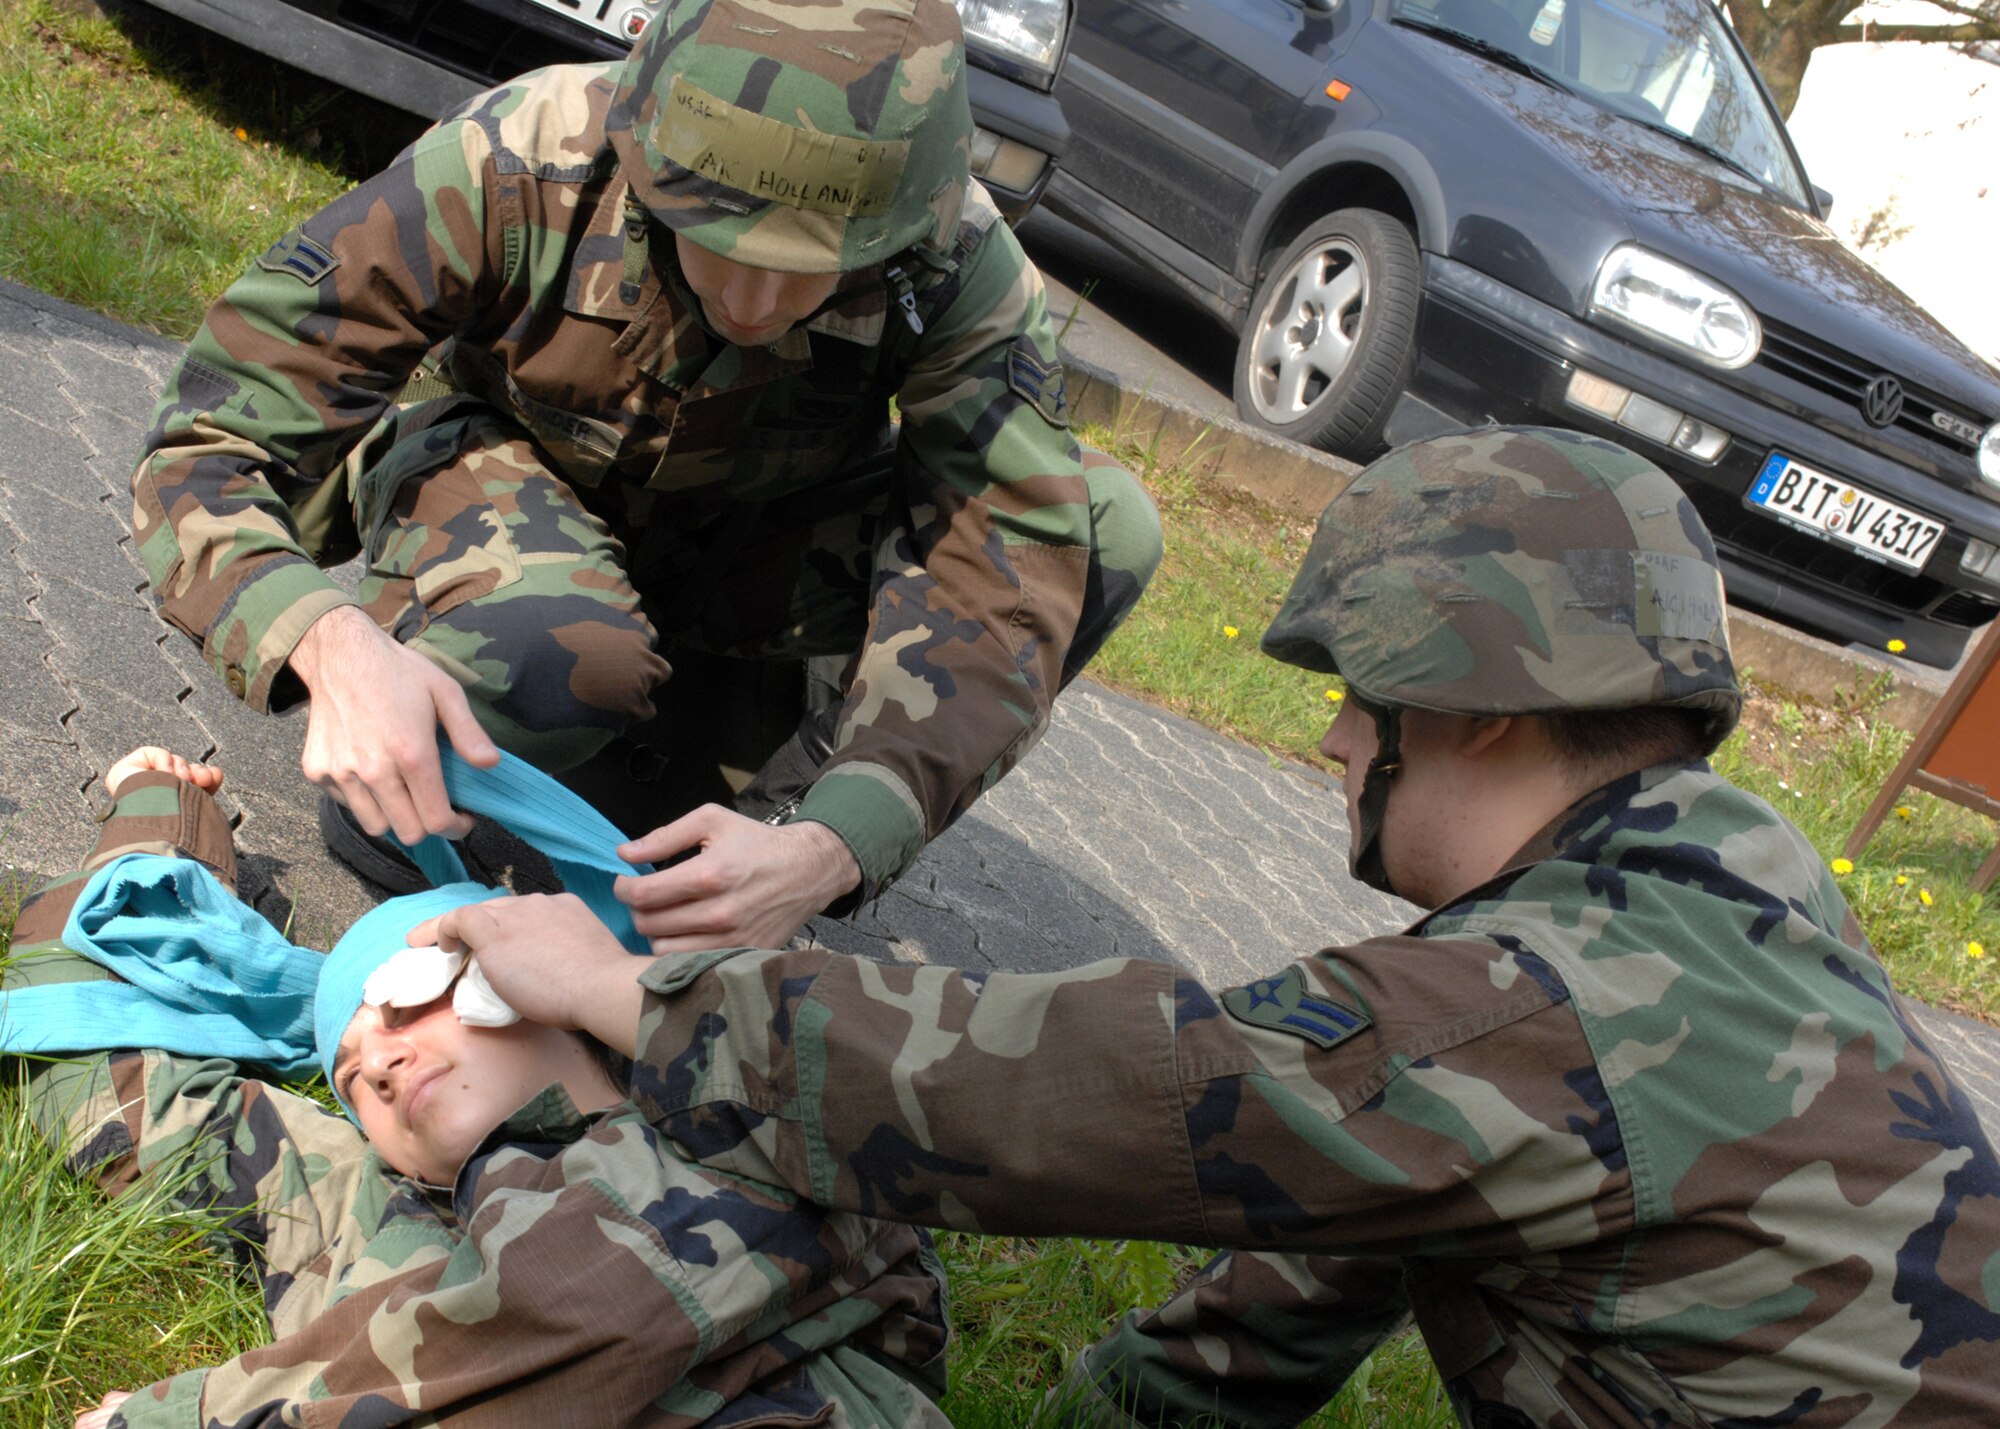 SPANGDAHLEM AIR BASE, Germany- Airman 1st Class Johnathan Hollander and Airman 1st Class Justin Holmes, both from the 52nd Maintenance Operations Squadron, assist a victim during the base wide exercise Operation Saber Crown 08-06 April 22, 2008. (U.S. Air Force photo/Airman 1st Class Jenifer Calhoun)